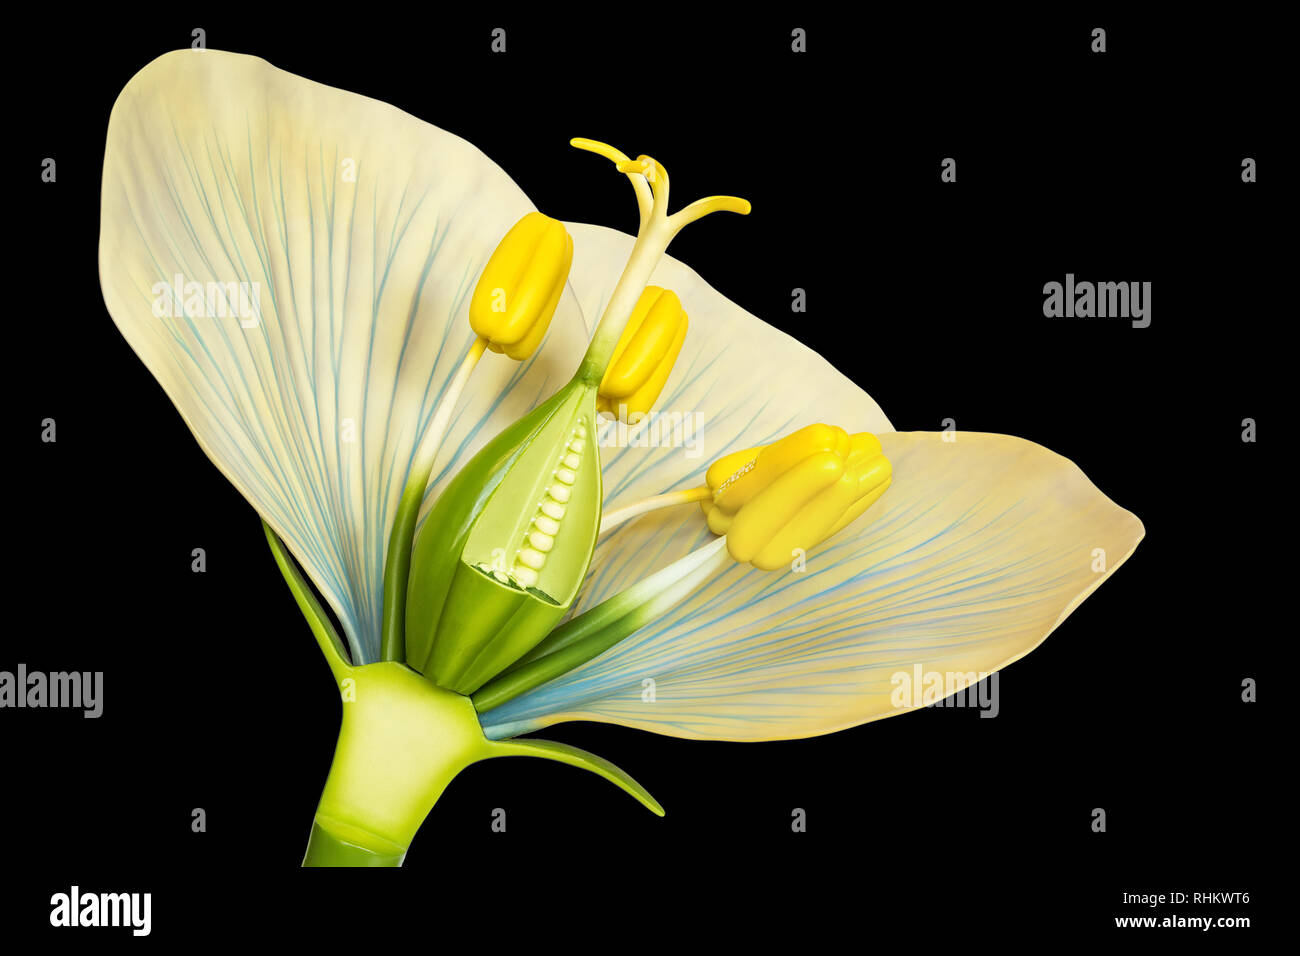 Flower model with stamens and pistils isolated on black background Stock Photo